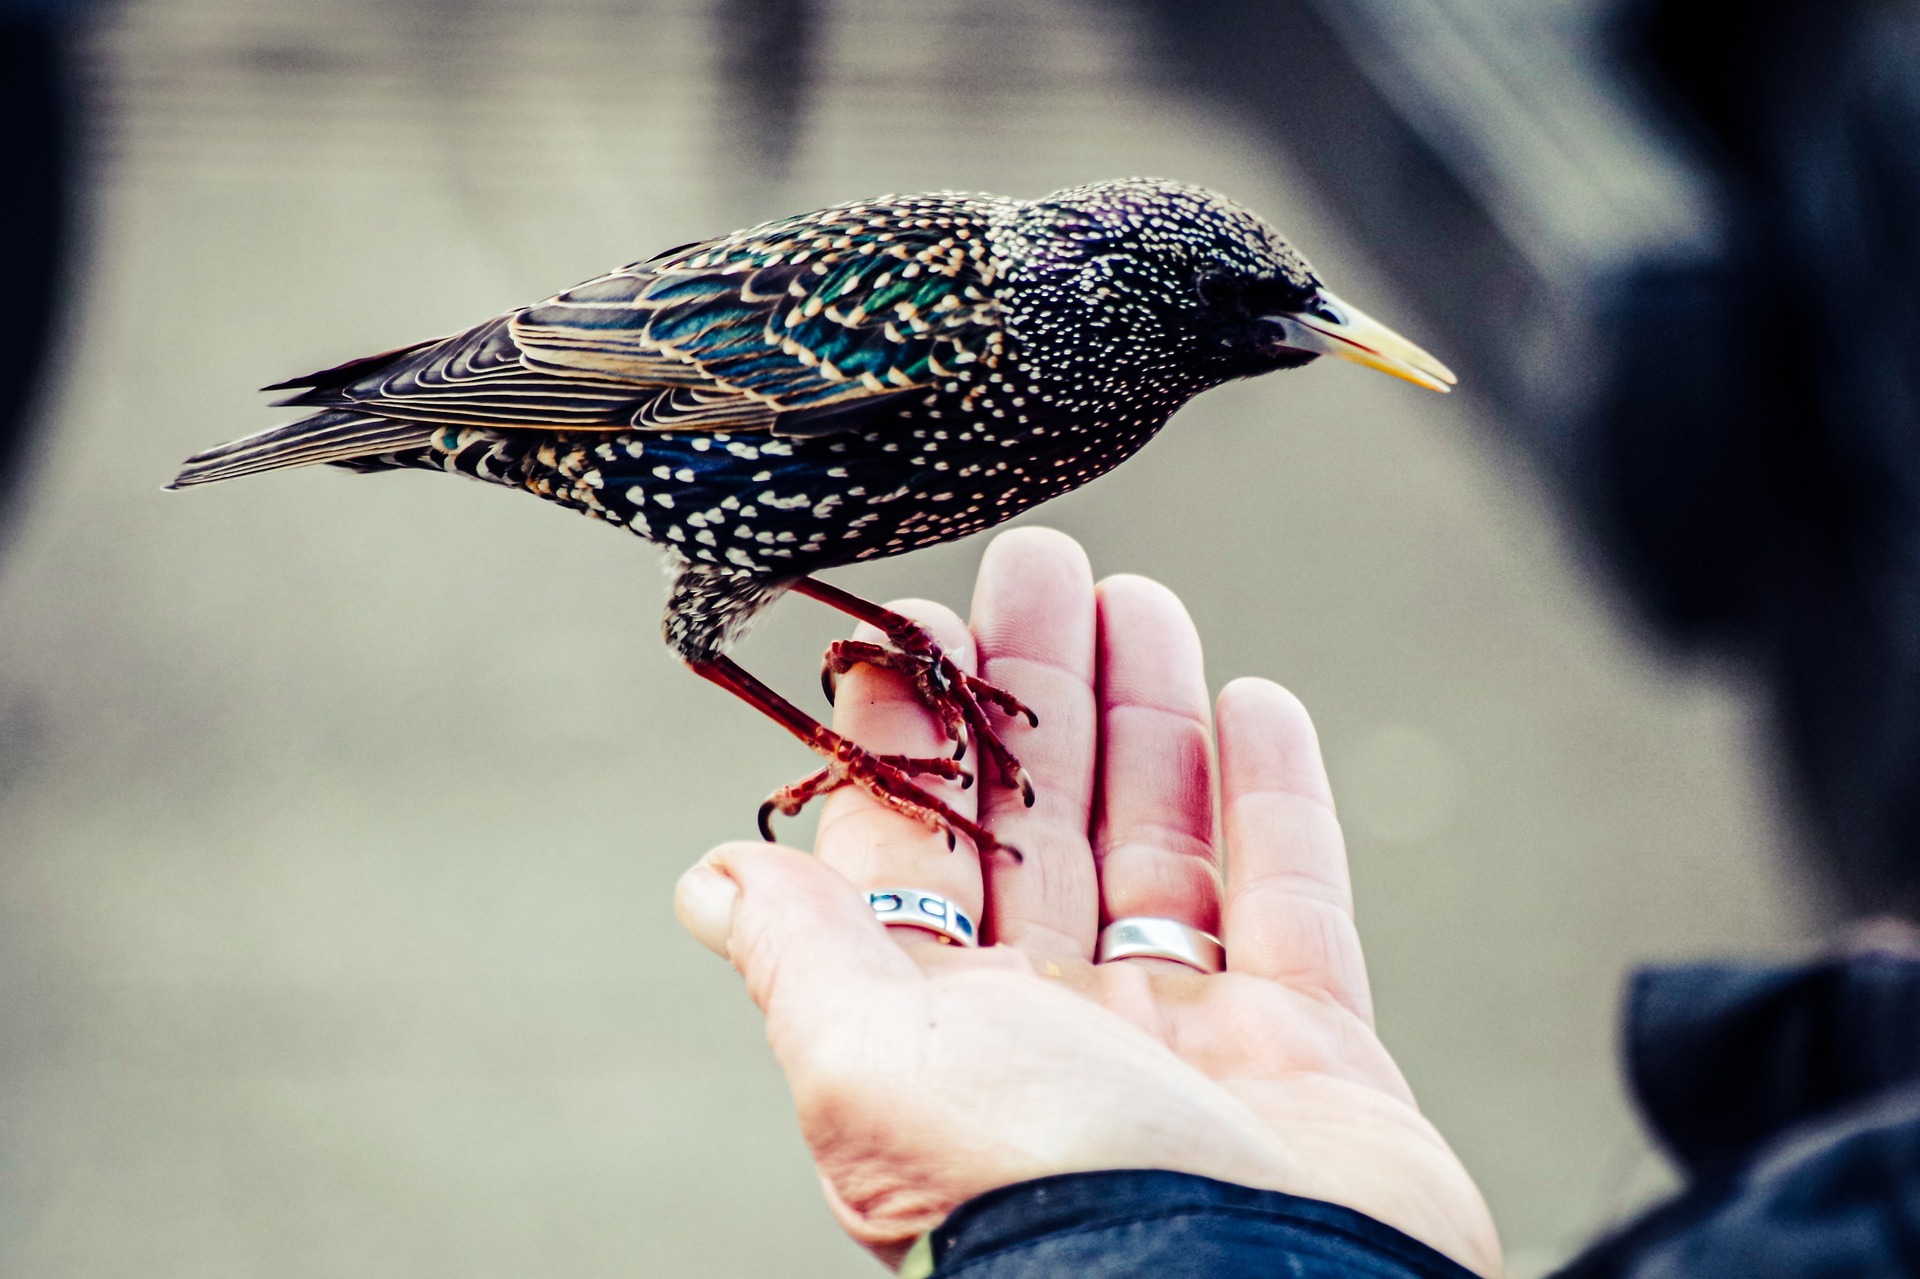 A Common Starling alights on a person's hand.